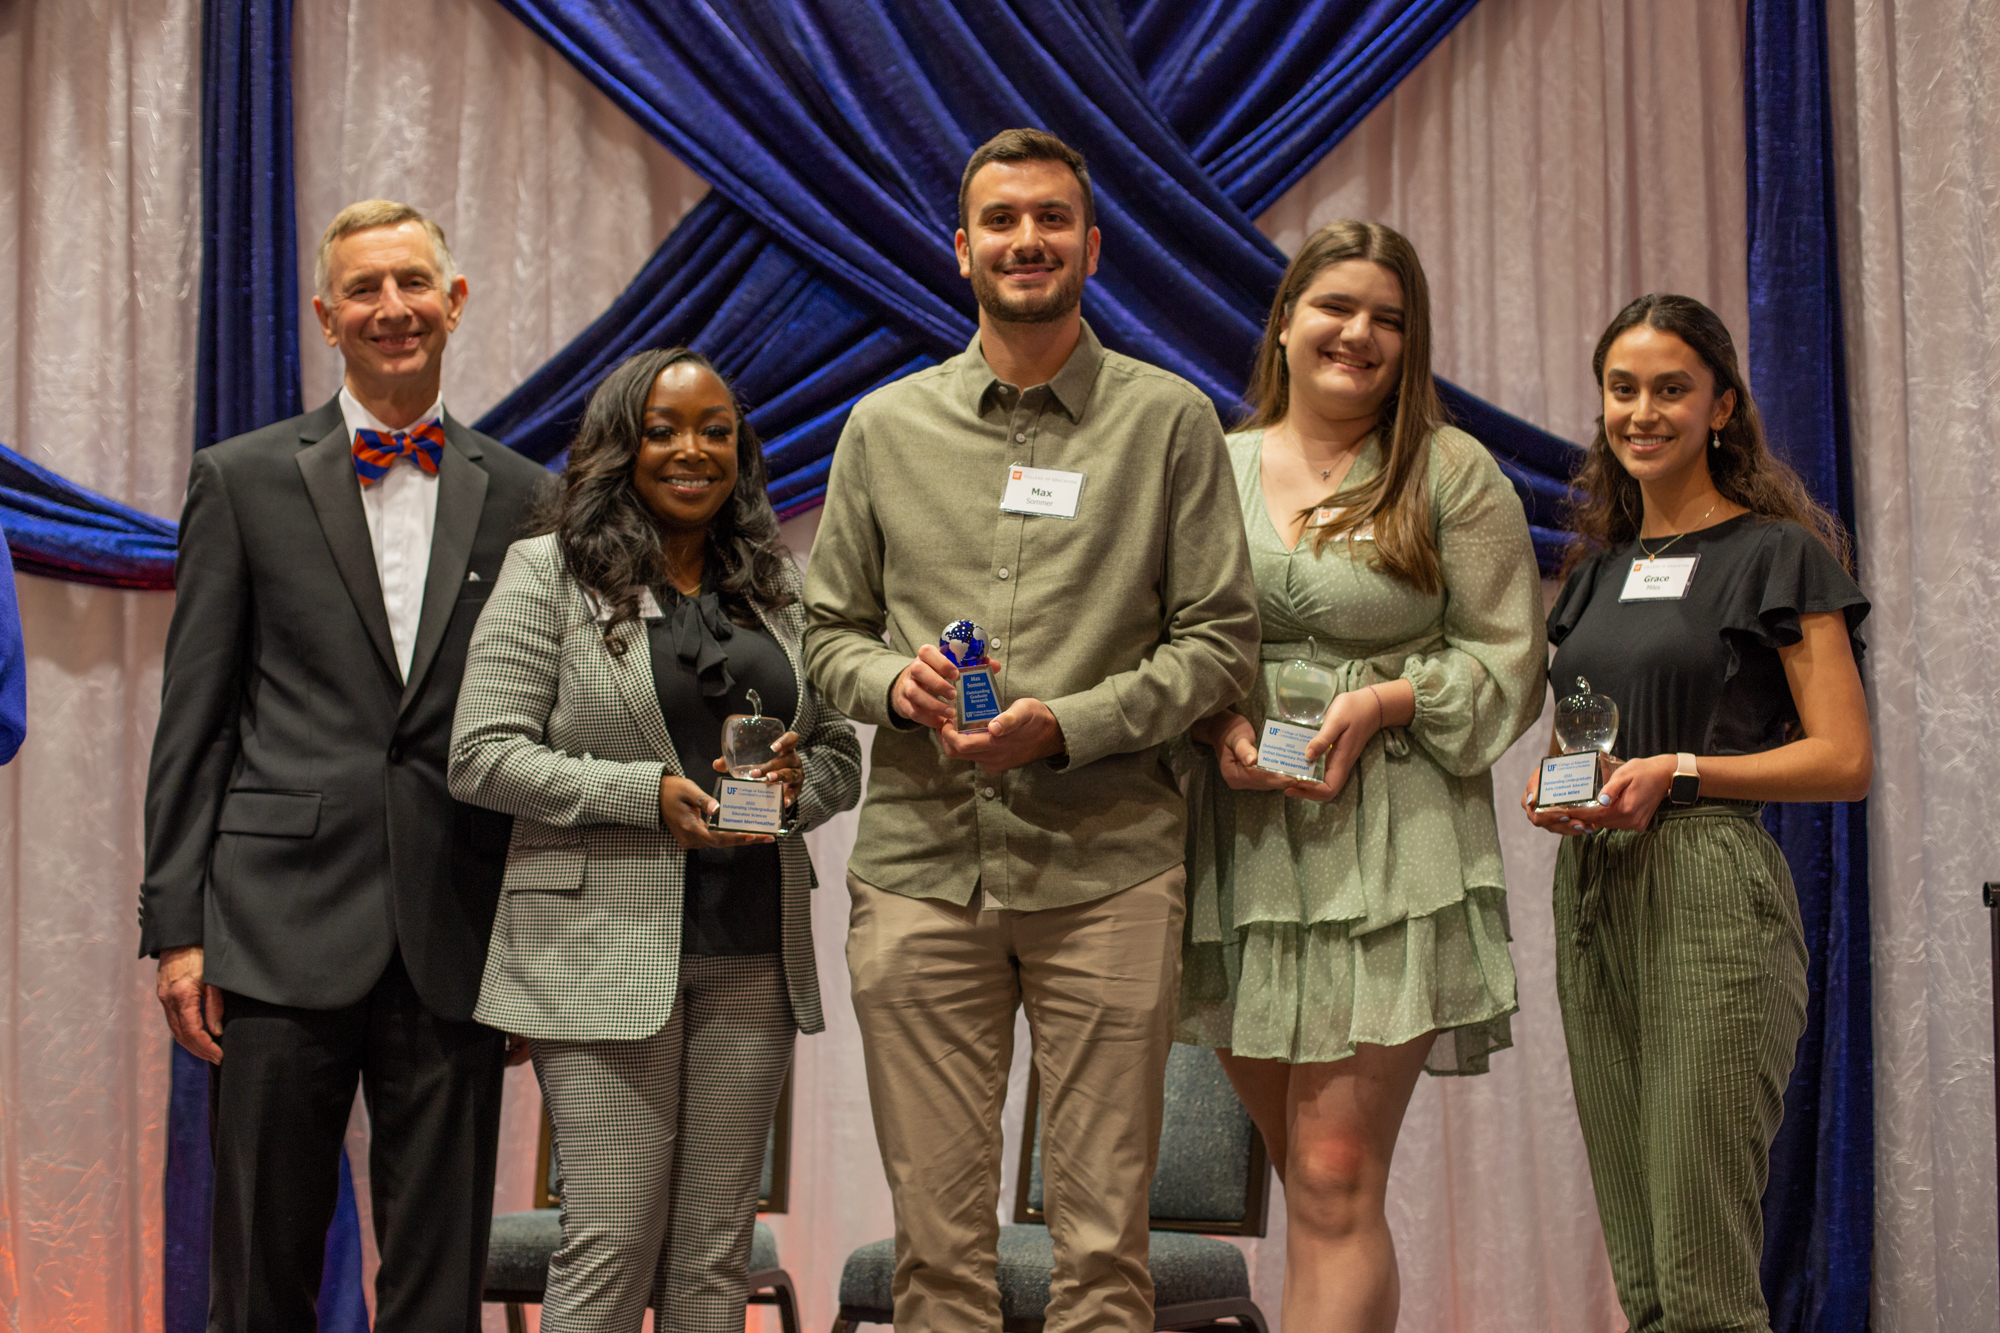 UF College of Education Dean Glenn Good posing with the 2022 student winners at the 19th annual Scholarship and Awards dinner. From left to right are Yasmeen Merriweather, Max Sommer, Nicole Wasserman and Grace Miles. All of them are in business casual attire and are standing against a white and blue draped fabric background.